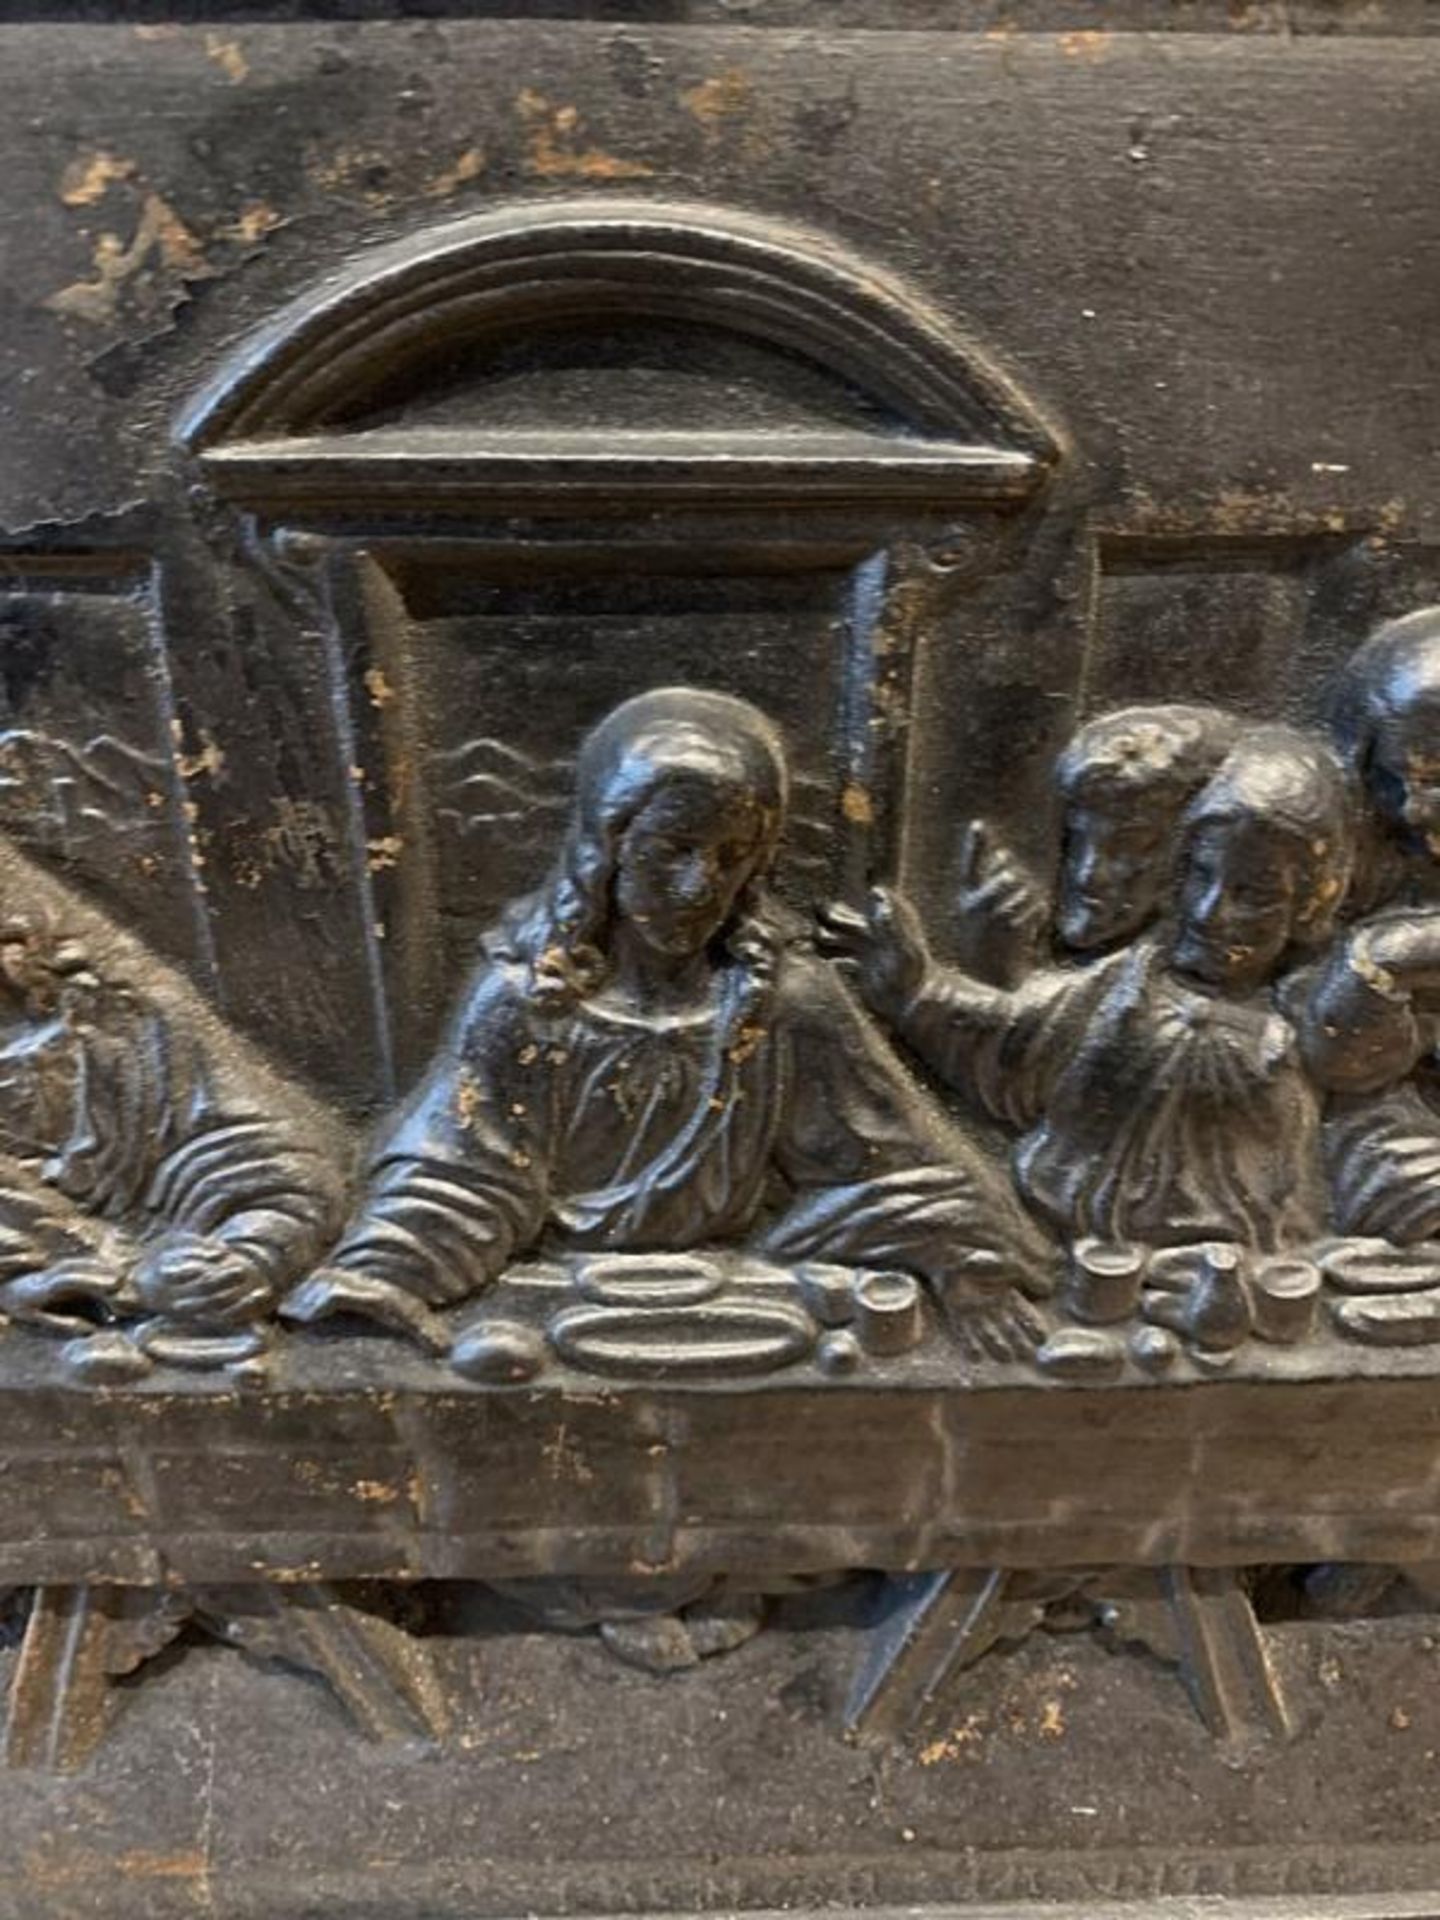 1 x Heavy Solid Cast Iron Rectangular Sculpture Featuring The Famous 'Last Supper' Scene - - Image 14 of 14